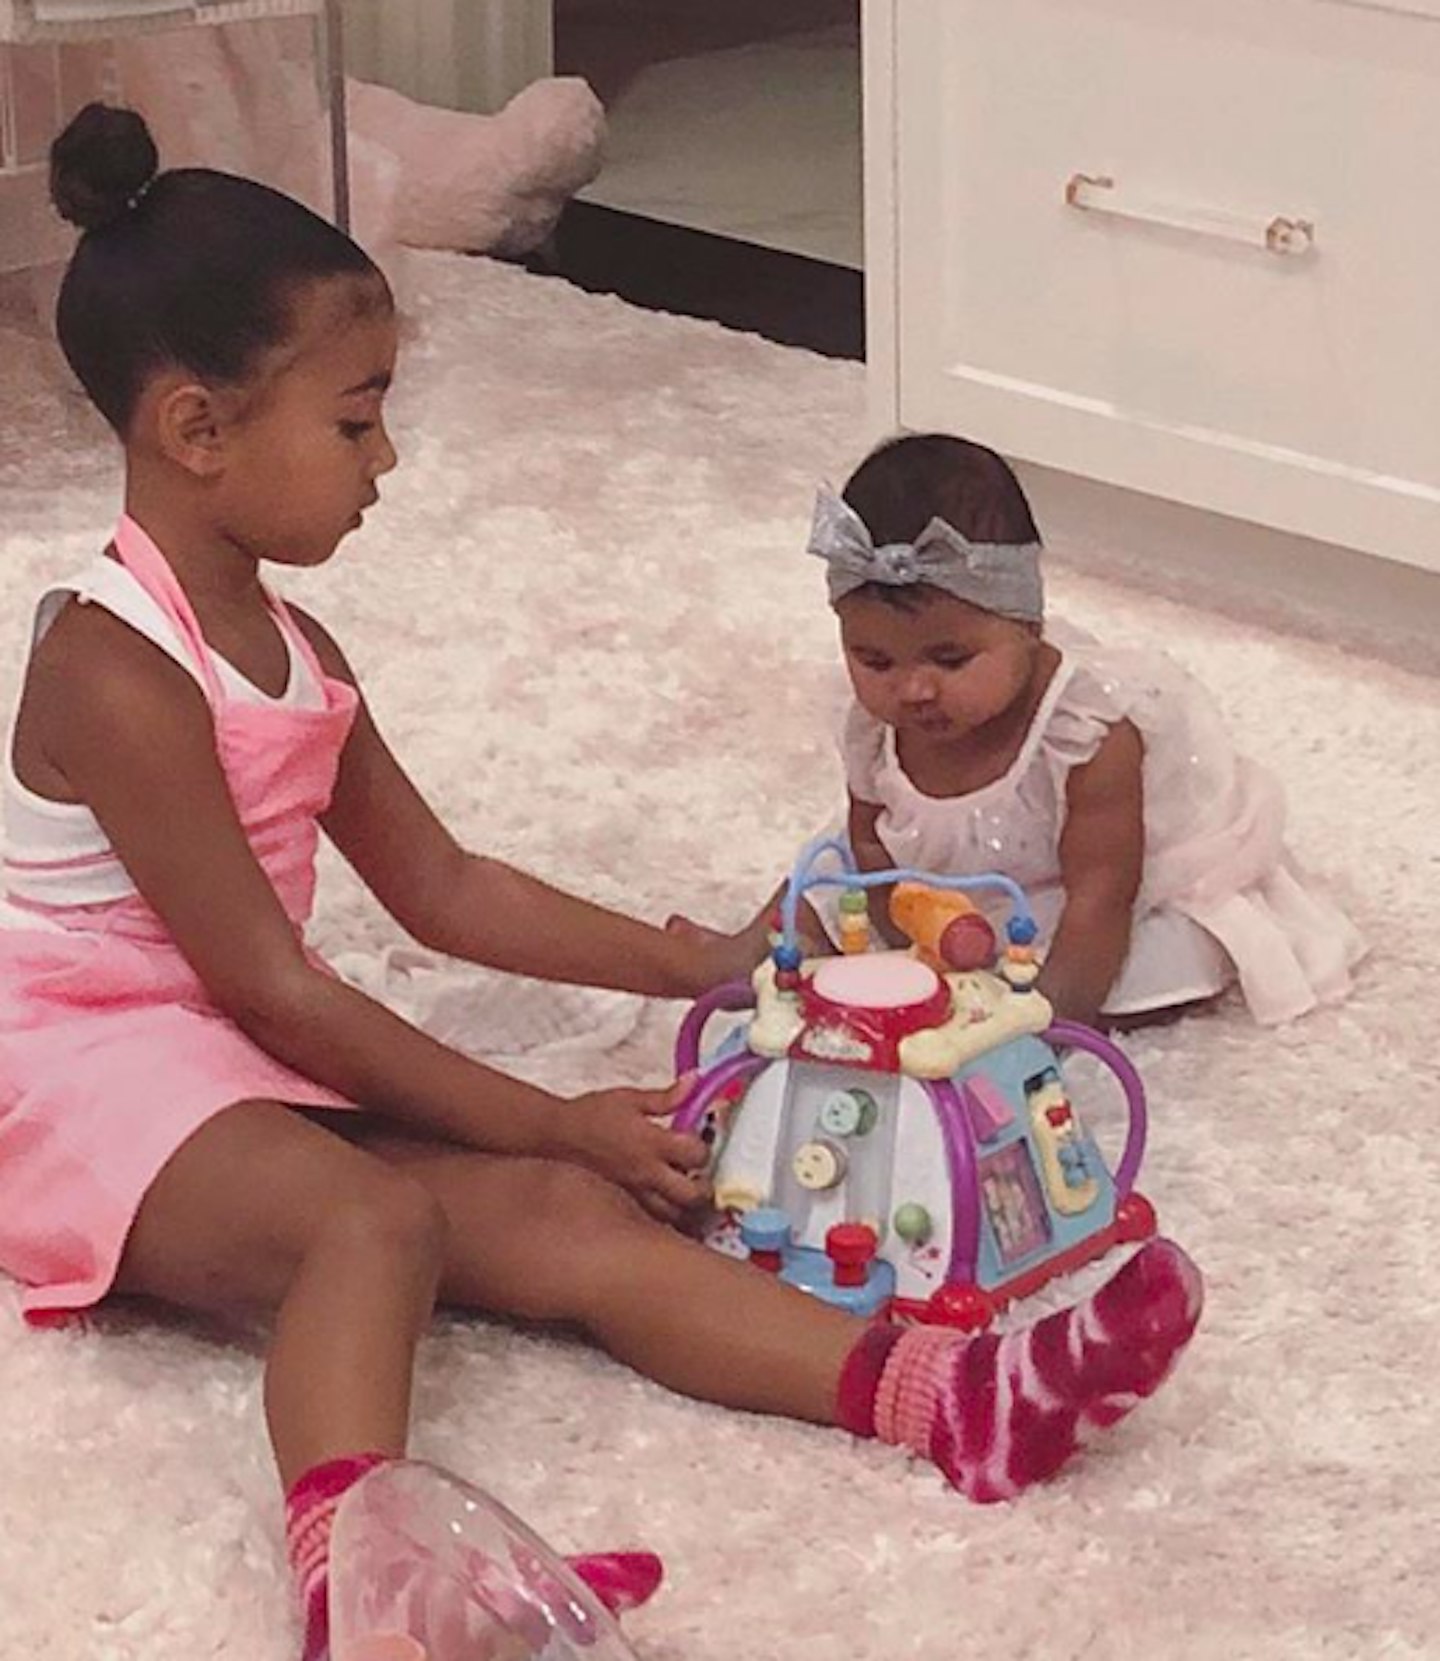 North West and True Thompson playing